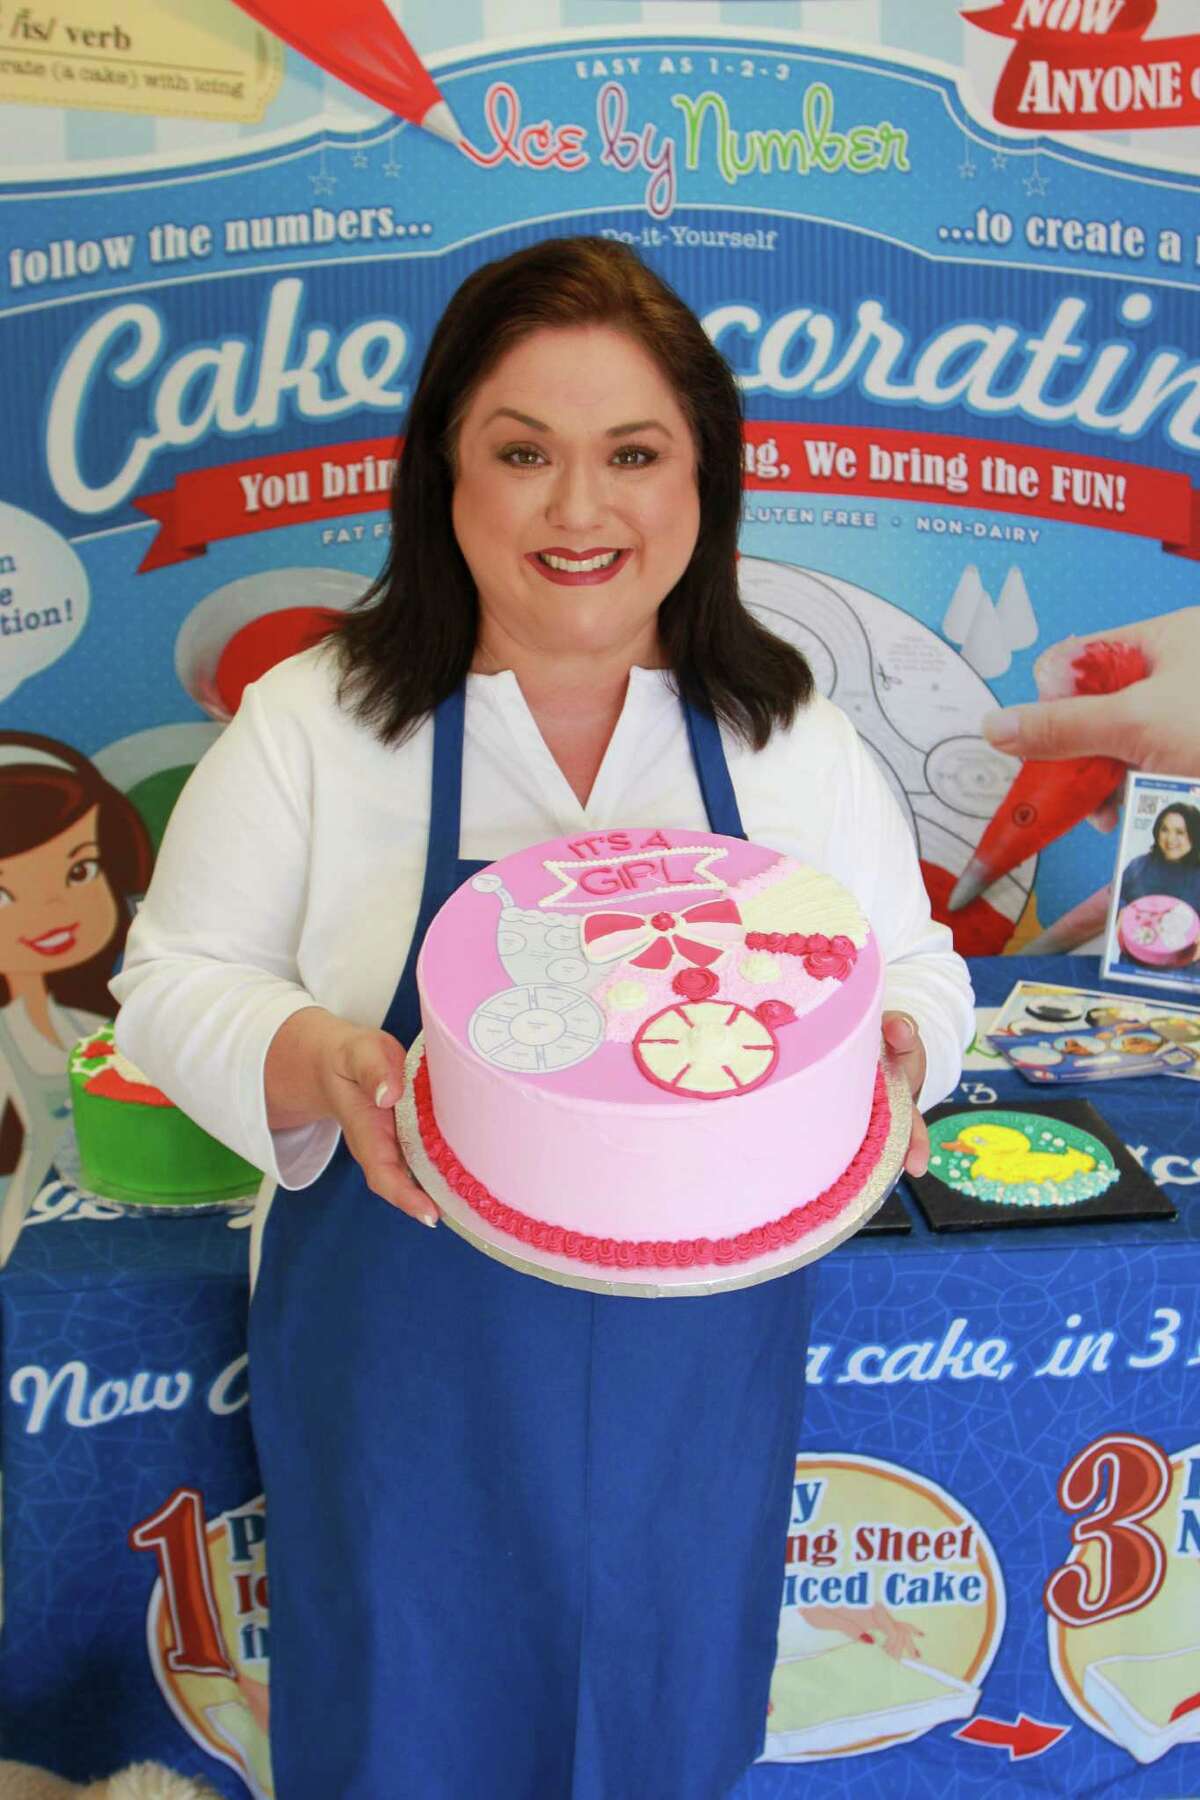 Pastry chef April Didrikson, holding partially decorated pattern It's A Girl, at the trade show display for her new product, Ice by Number, which anyone can use to decorate a cake. Ice by Number is the world's first edible pattern for decorating baked goods with icing. Ice by Number has a variety of patterns, including all occasional, seasonal and holiday designs. A national retailer will debut the Ice by Number product in their top 500 stores by this Christmas holiday season. Pastry chef April Didrikson, holding partially decorated pattern It's A Girl, at the trade show display for her new product, Ice by Number, which anyone can use to decorate a cake. Ice by Number is the world's first edible pattern for decorating baked goods with icing. Ice by Number has a variety of patterns, including all occasional, seasonal and holiday designs. A national retailer will debut the Ice by Number product in their top 500 stores by this Christmas holiday season.